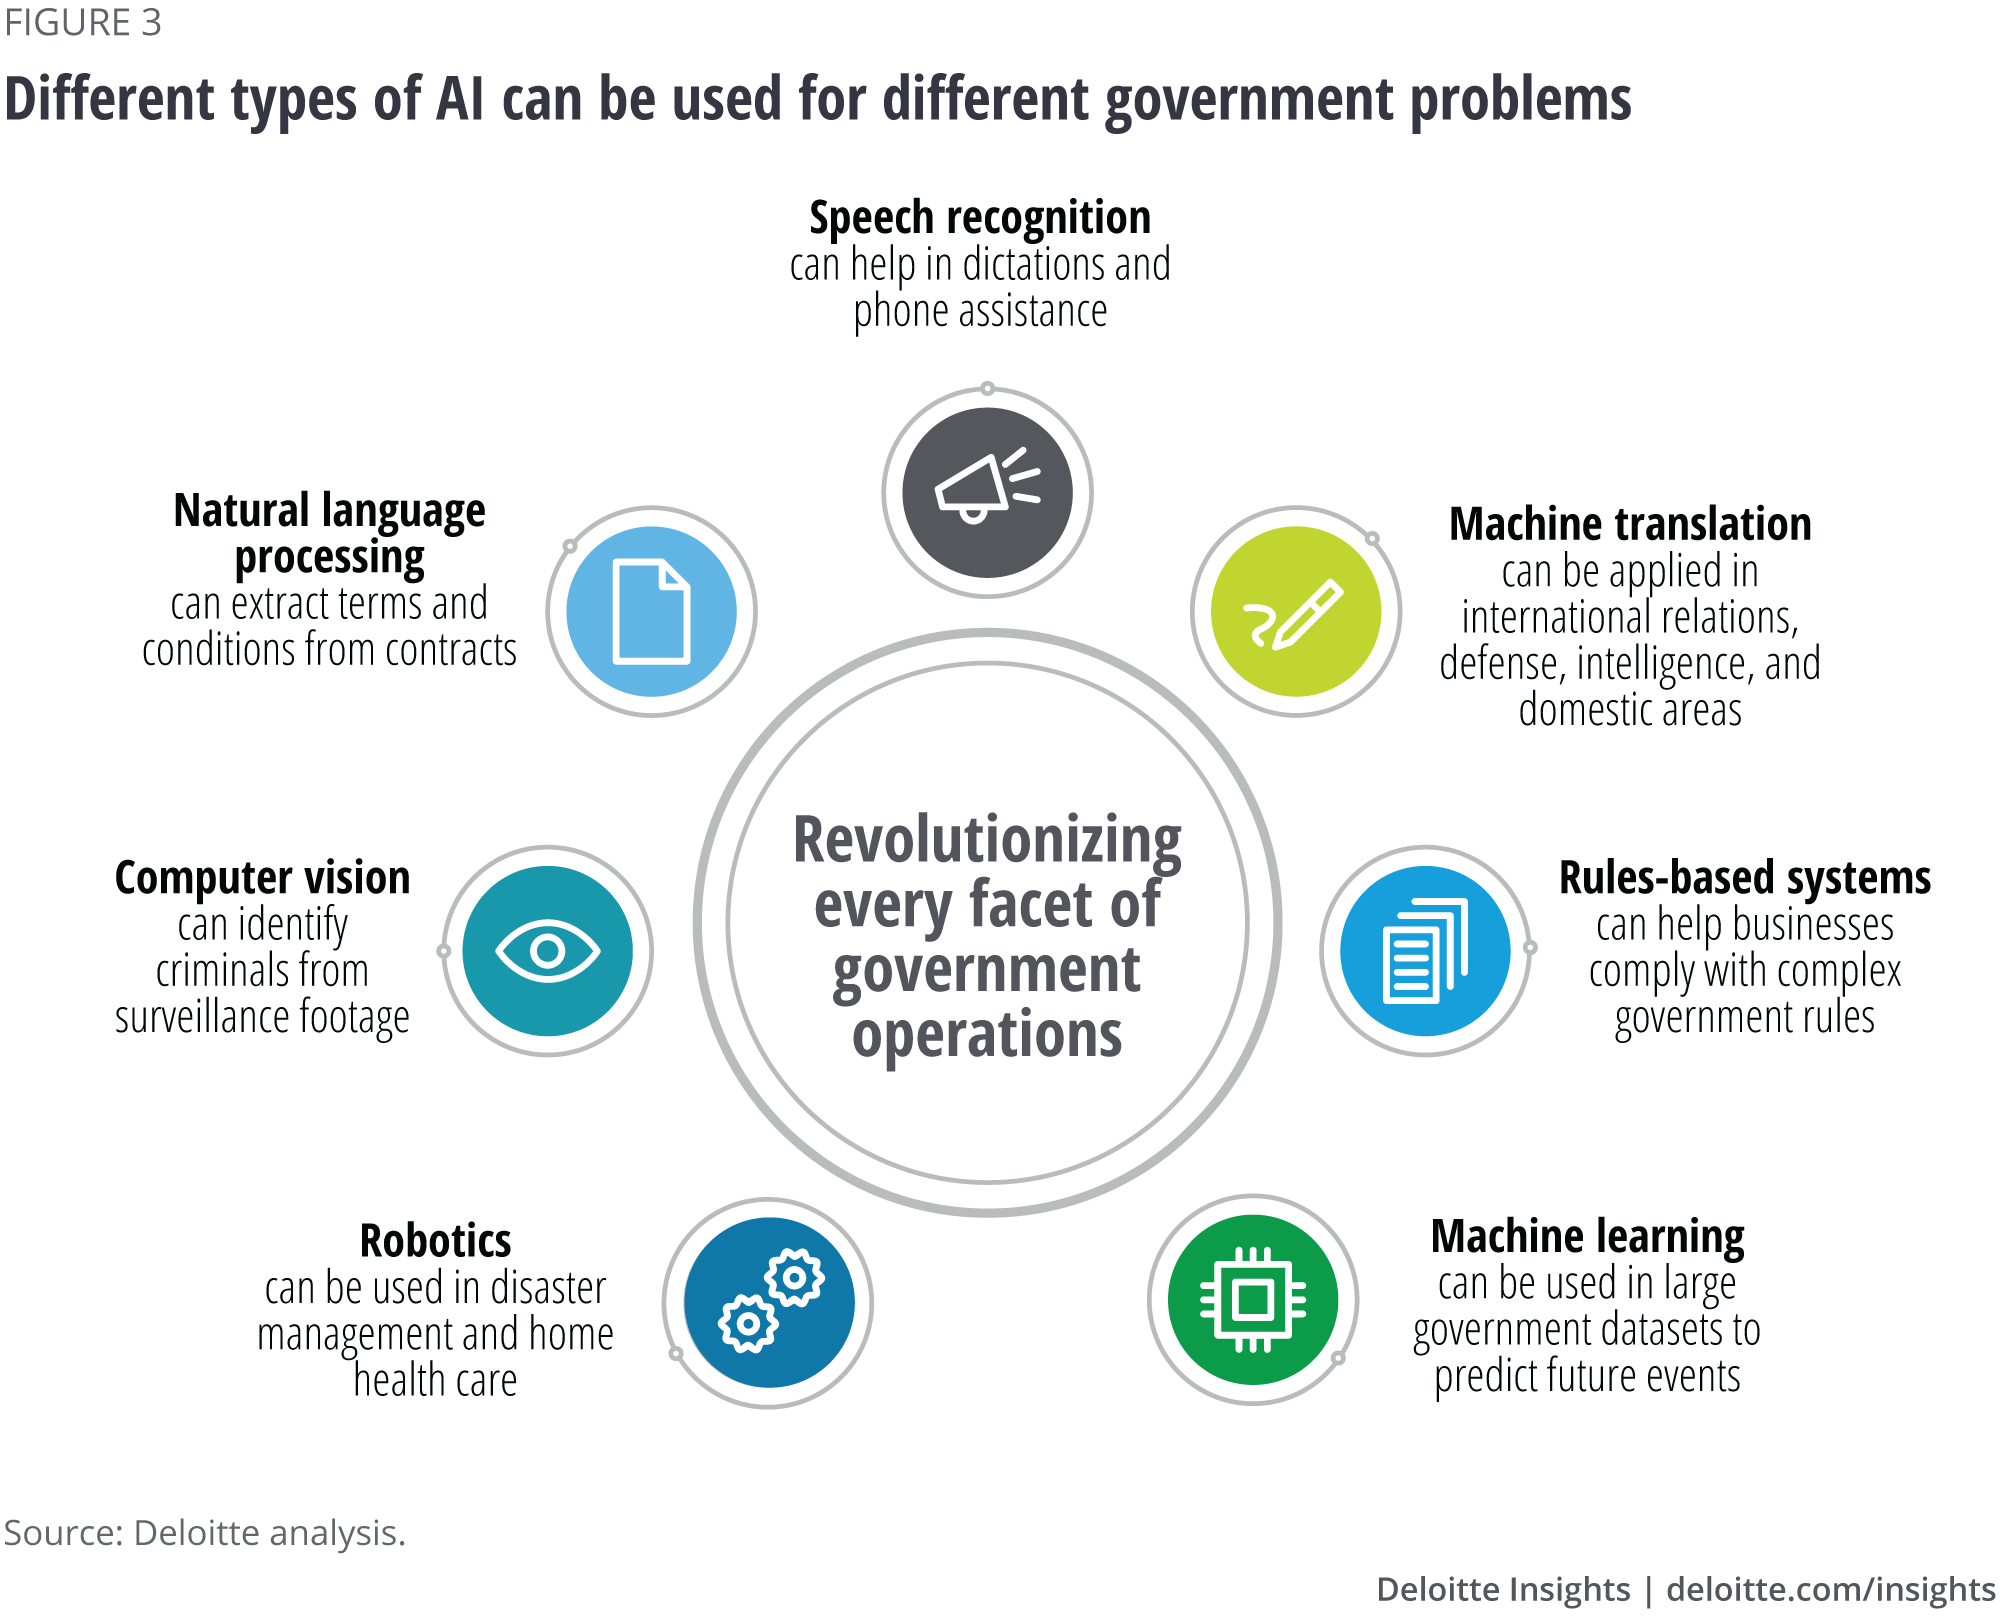 Different types of AI can be used for different government problems